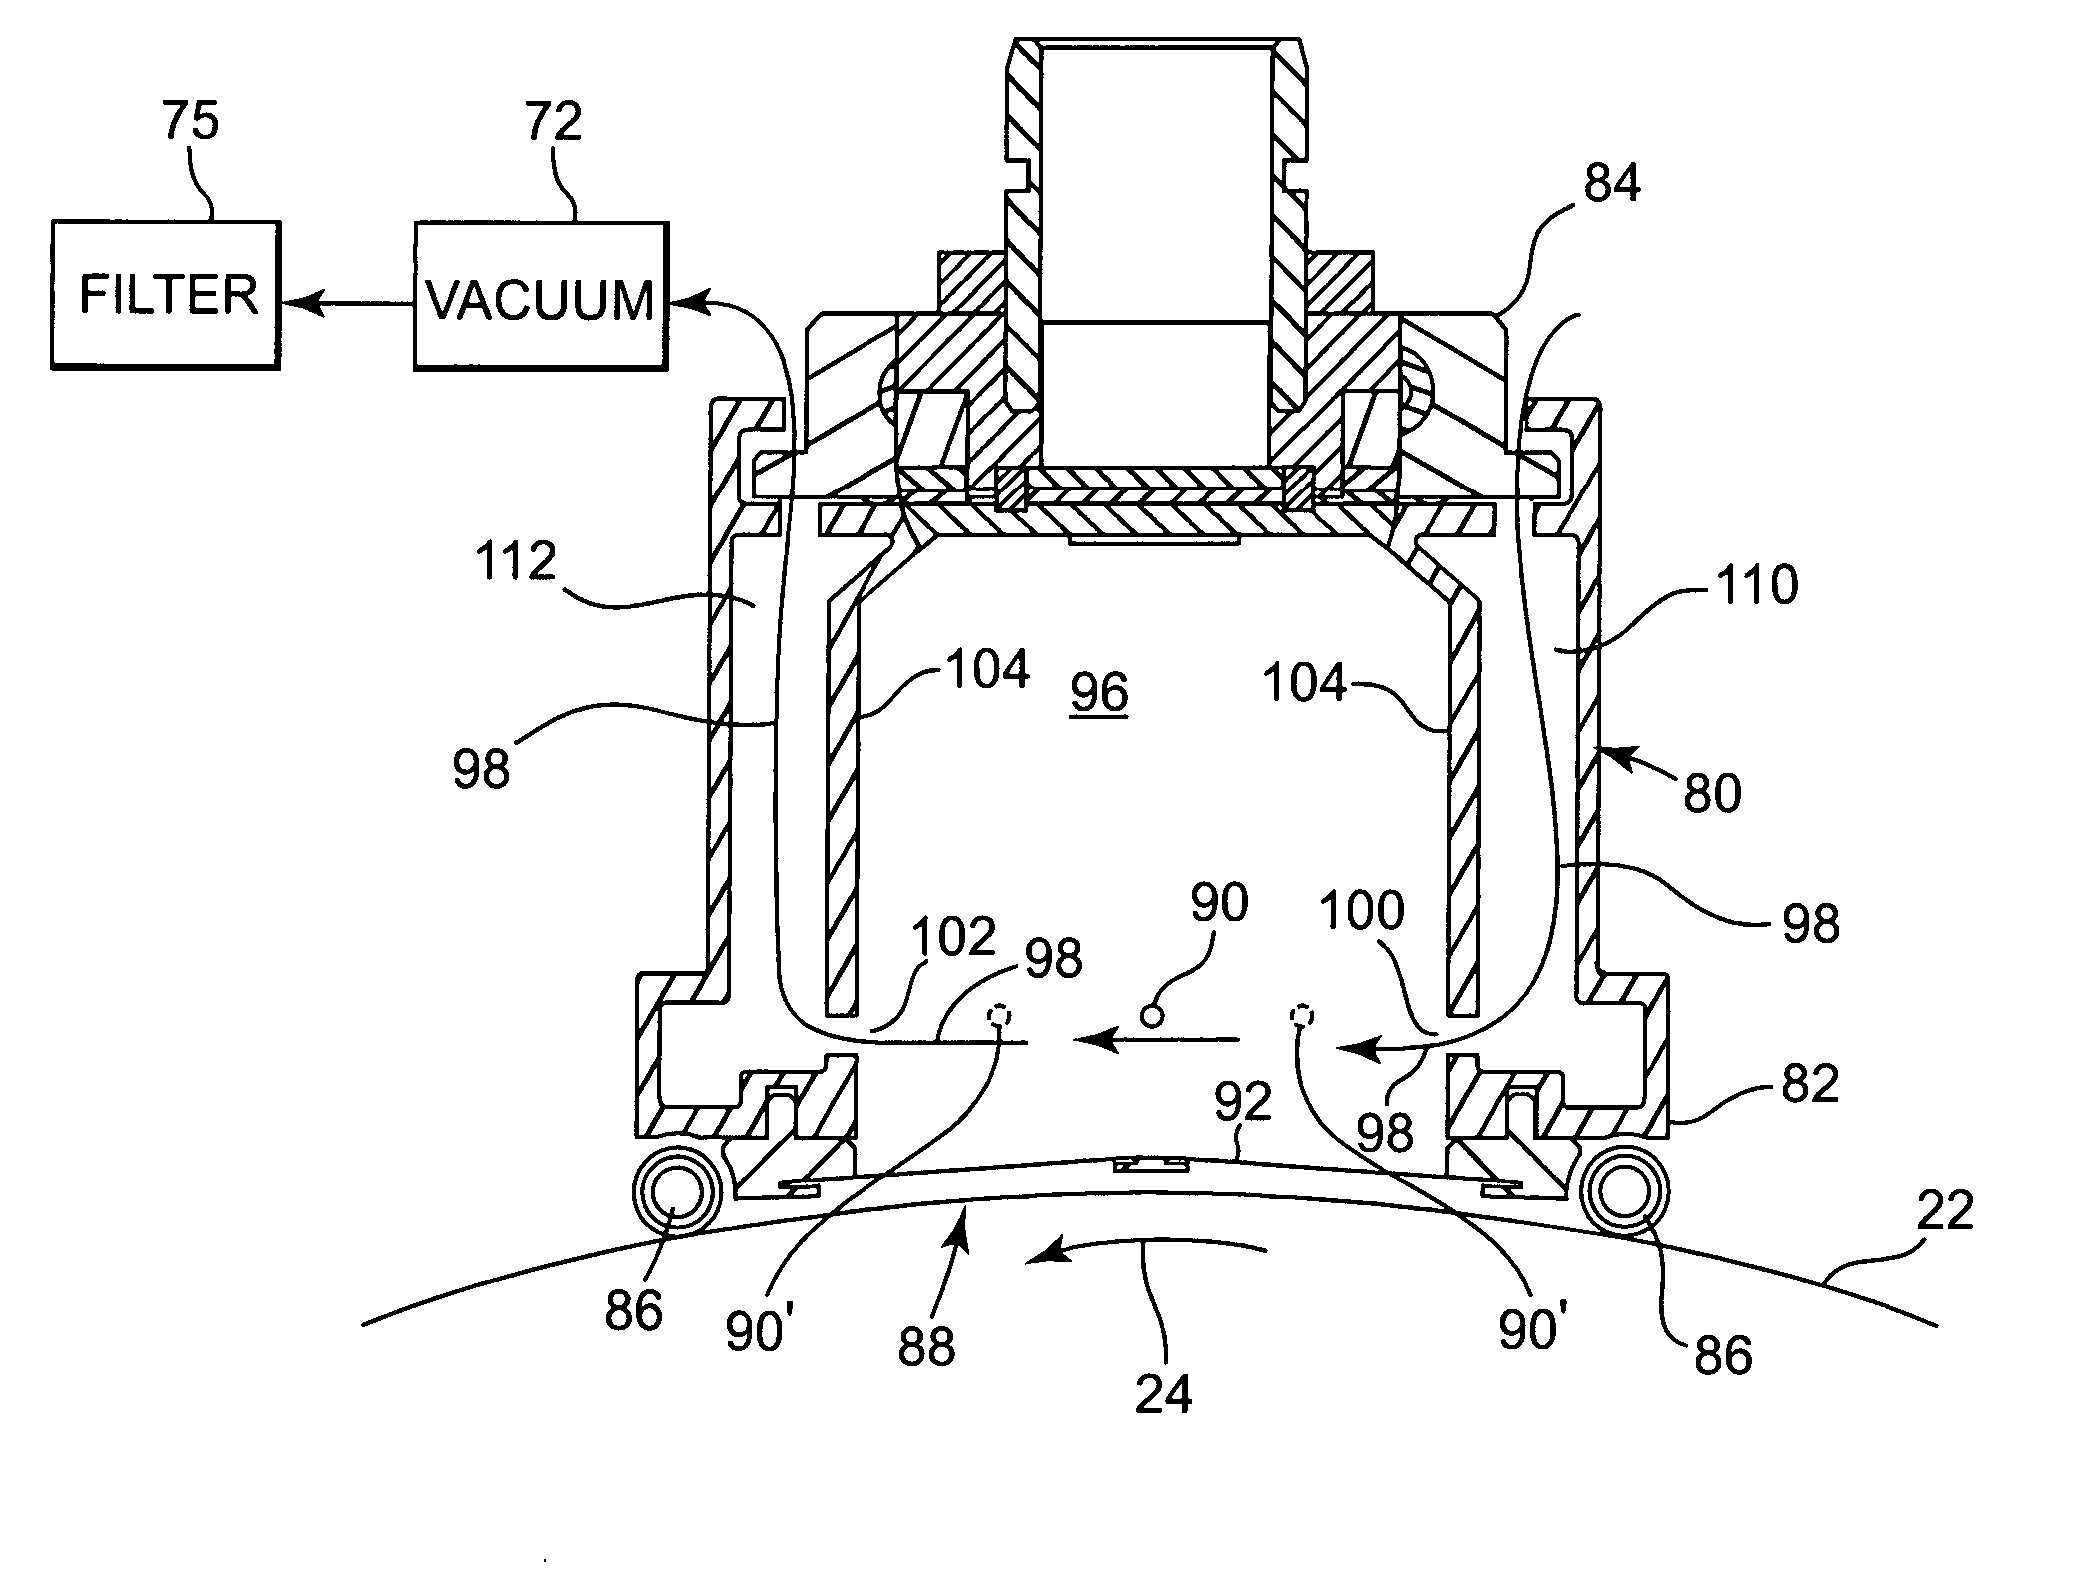 Apparatus and method for reducing contamination of an image transfer device